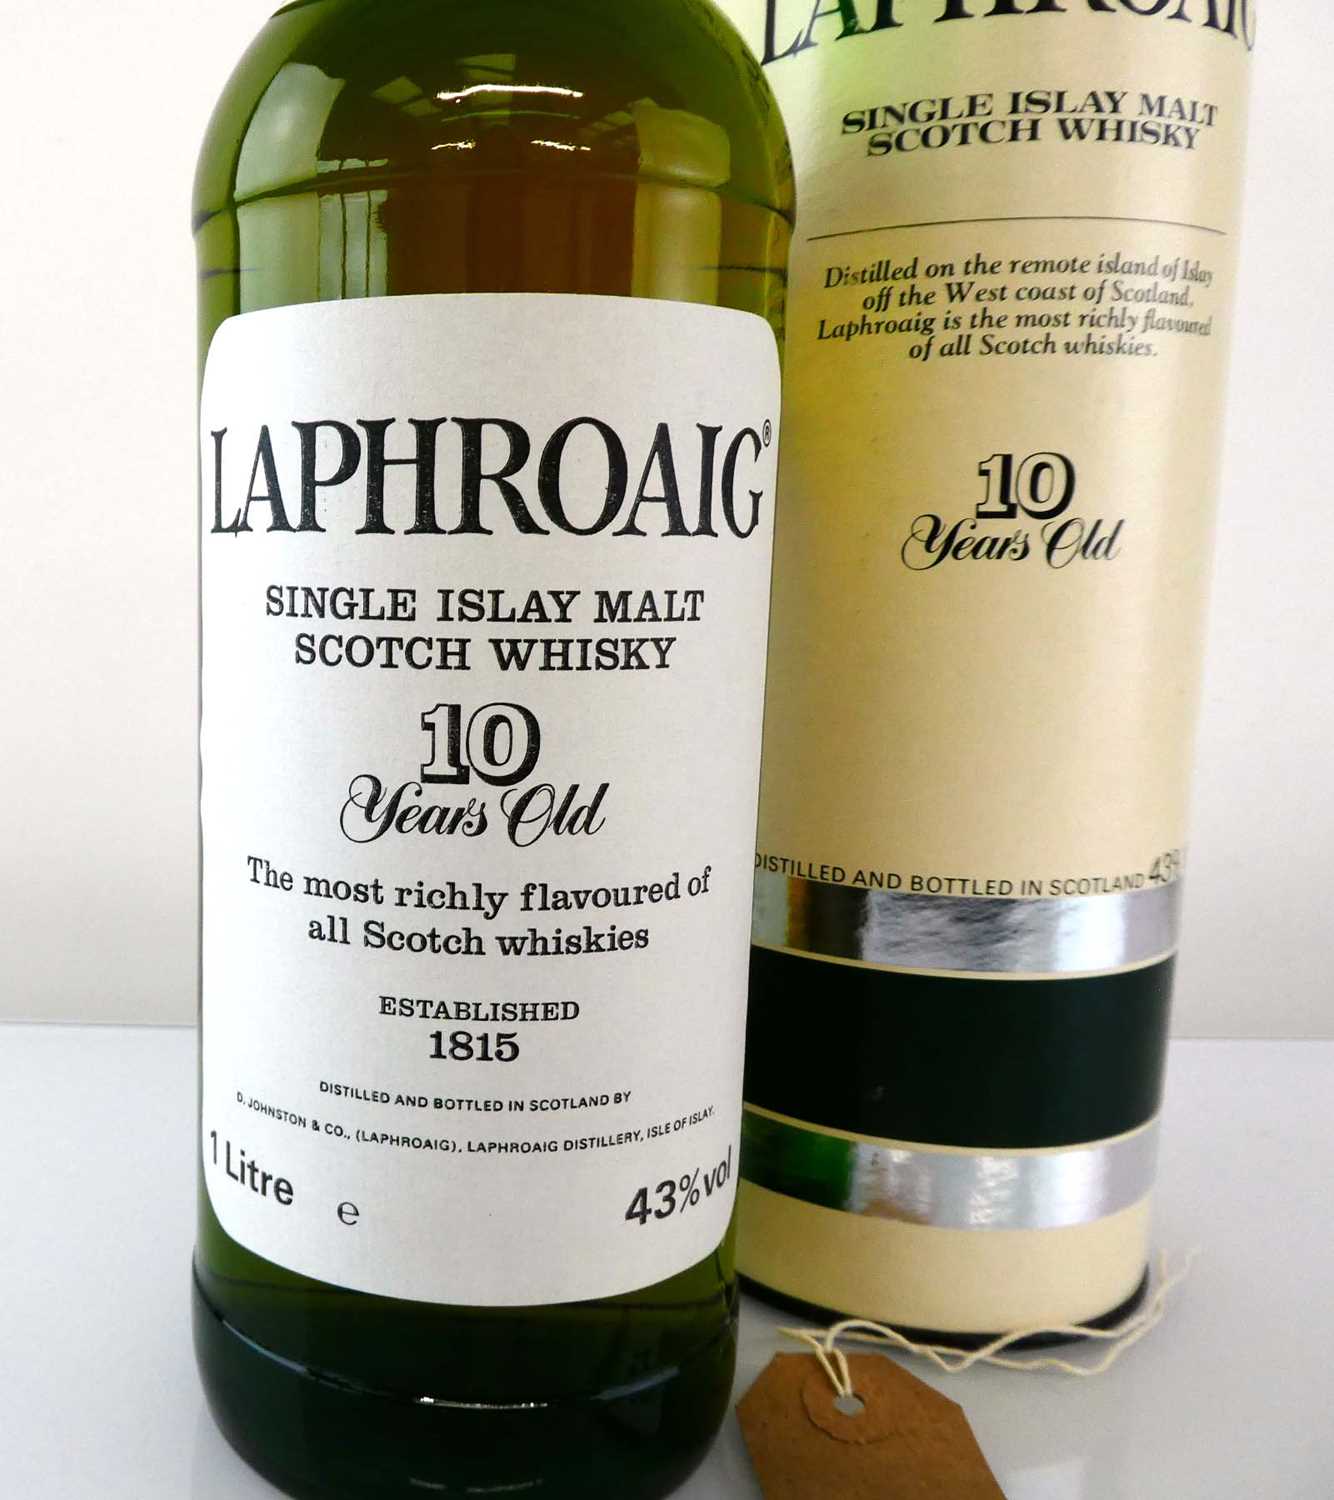 A bottle of Laphroaig 10 year old Islay Single Malt Scotch Whisky Pre Royal Warrant with carton 1 - Image 2 of 3